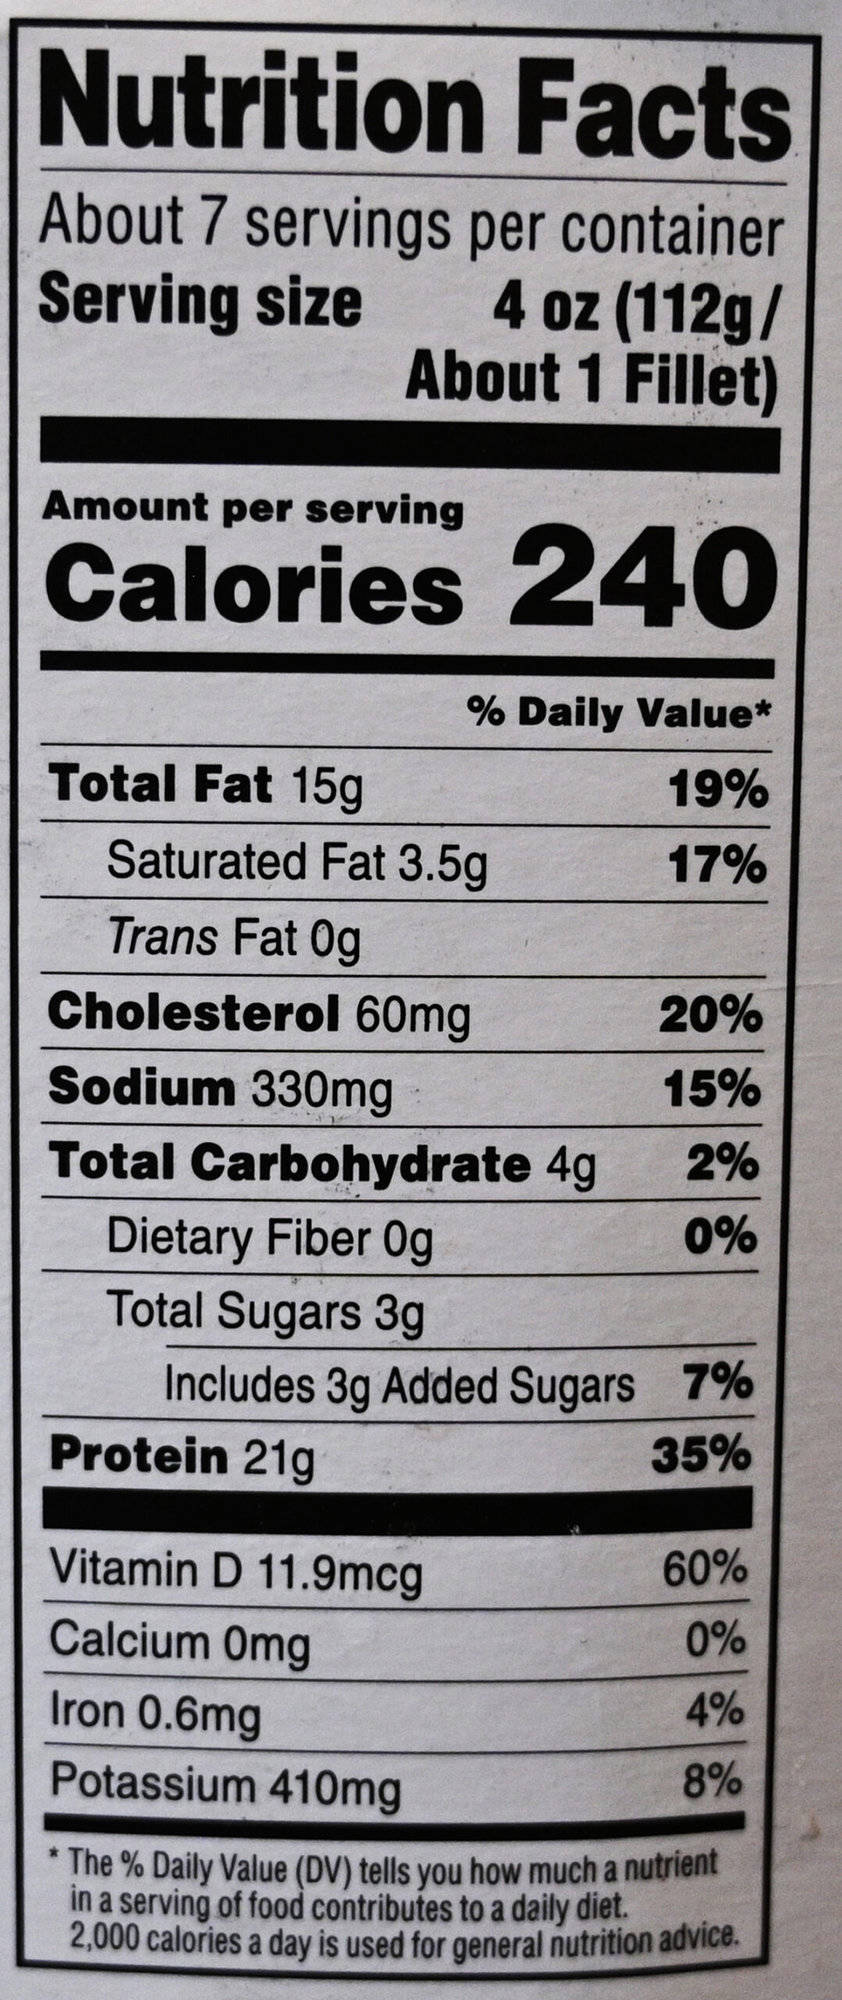 Image of the nutrition facts from the back of the box.